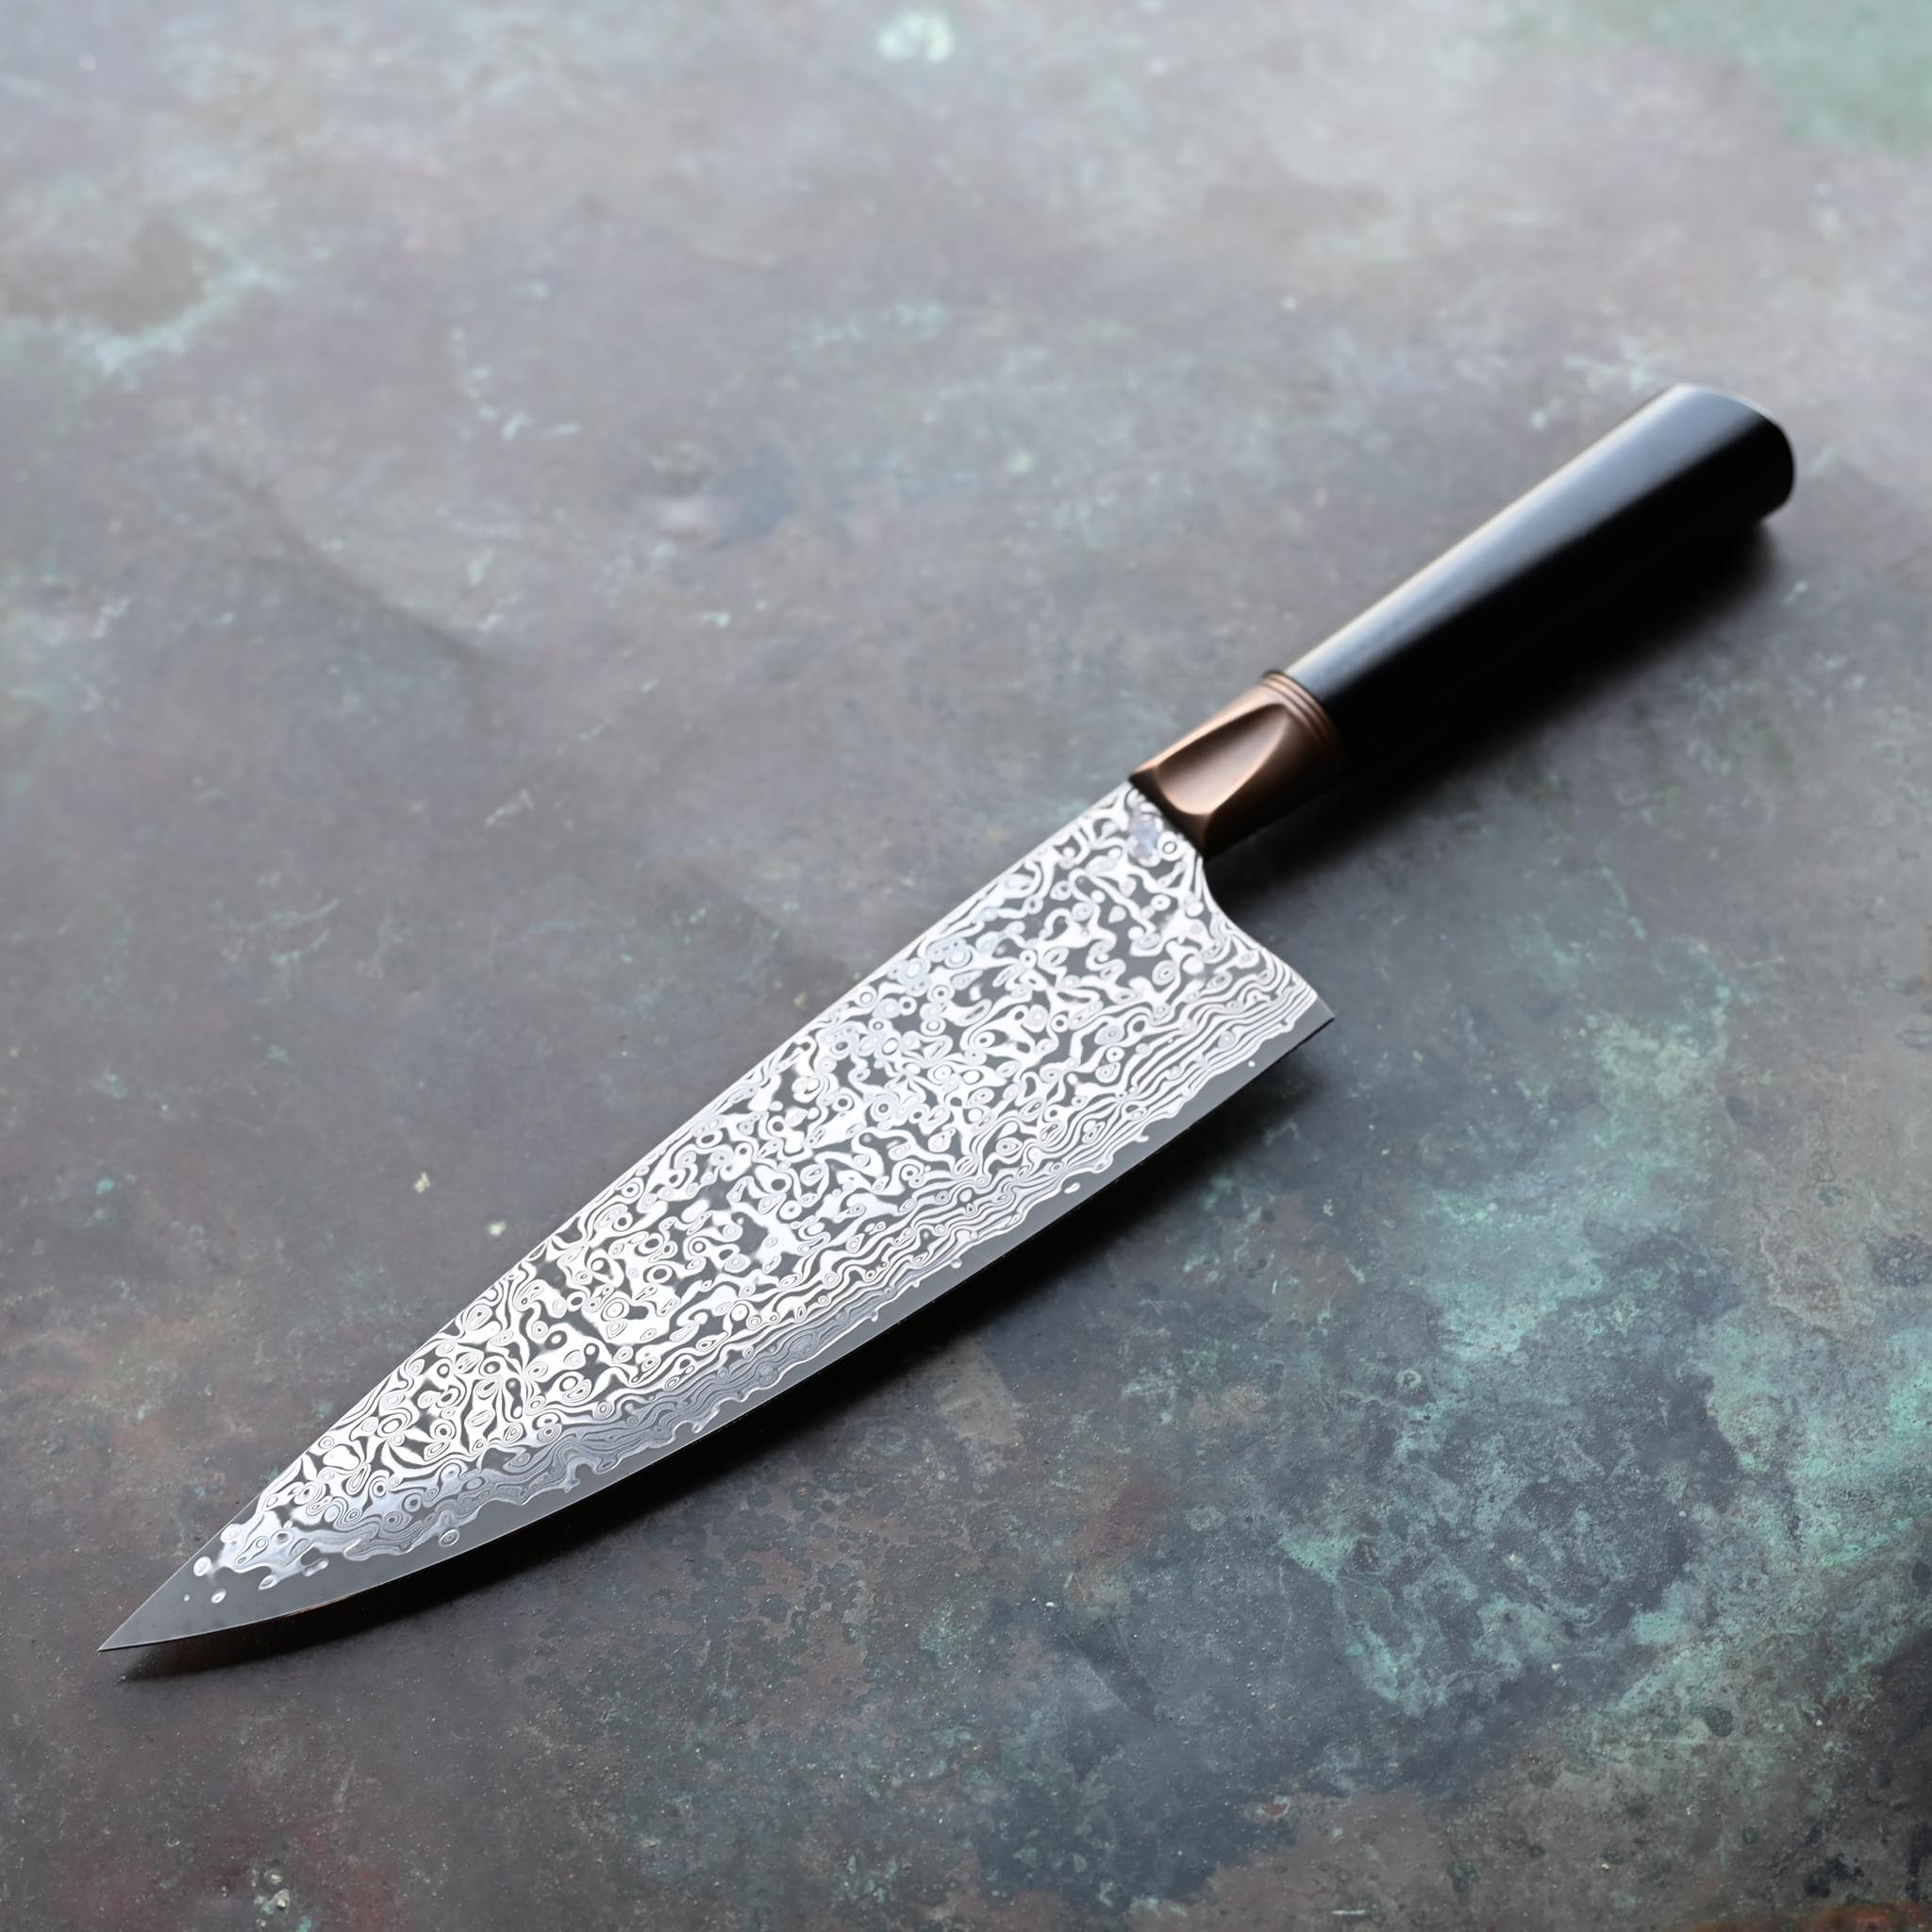 Damascus Steel Chef Knife with Antique Bolster and Black Handle on Concrete Background